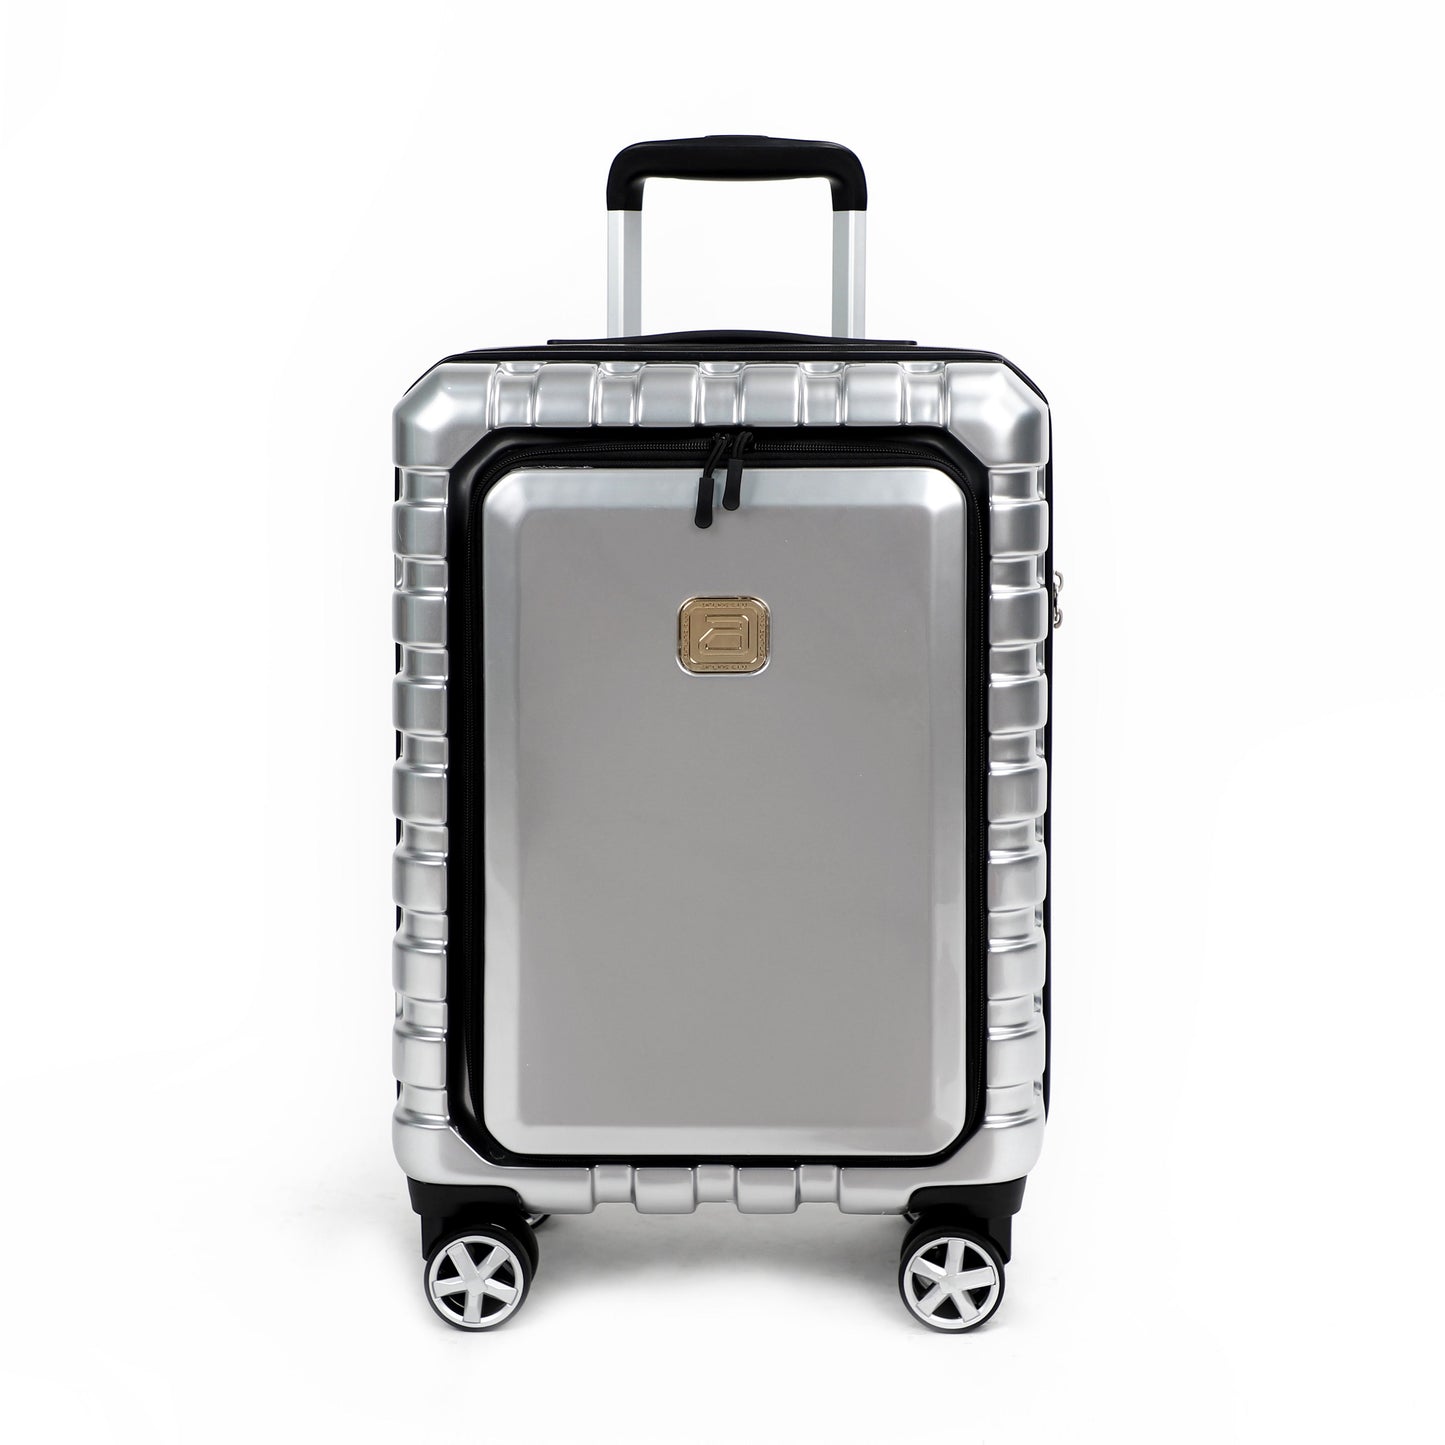 Airline_Carry_On_Luggage_Silver_front_viewT1978155103